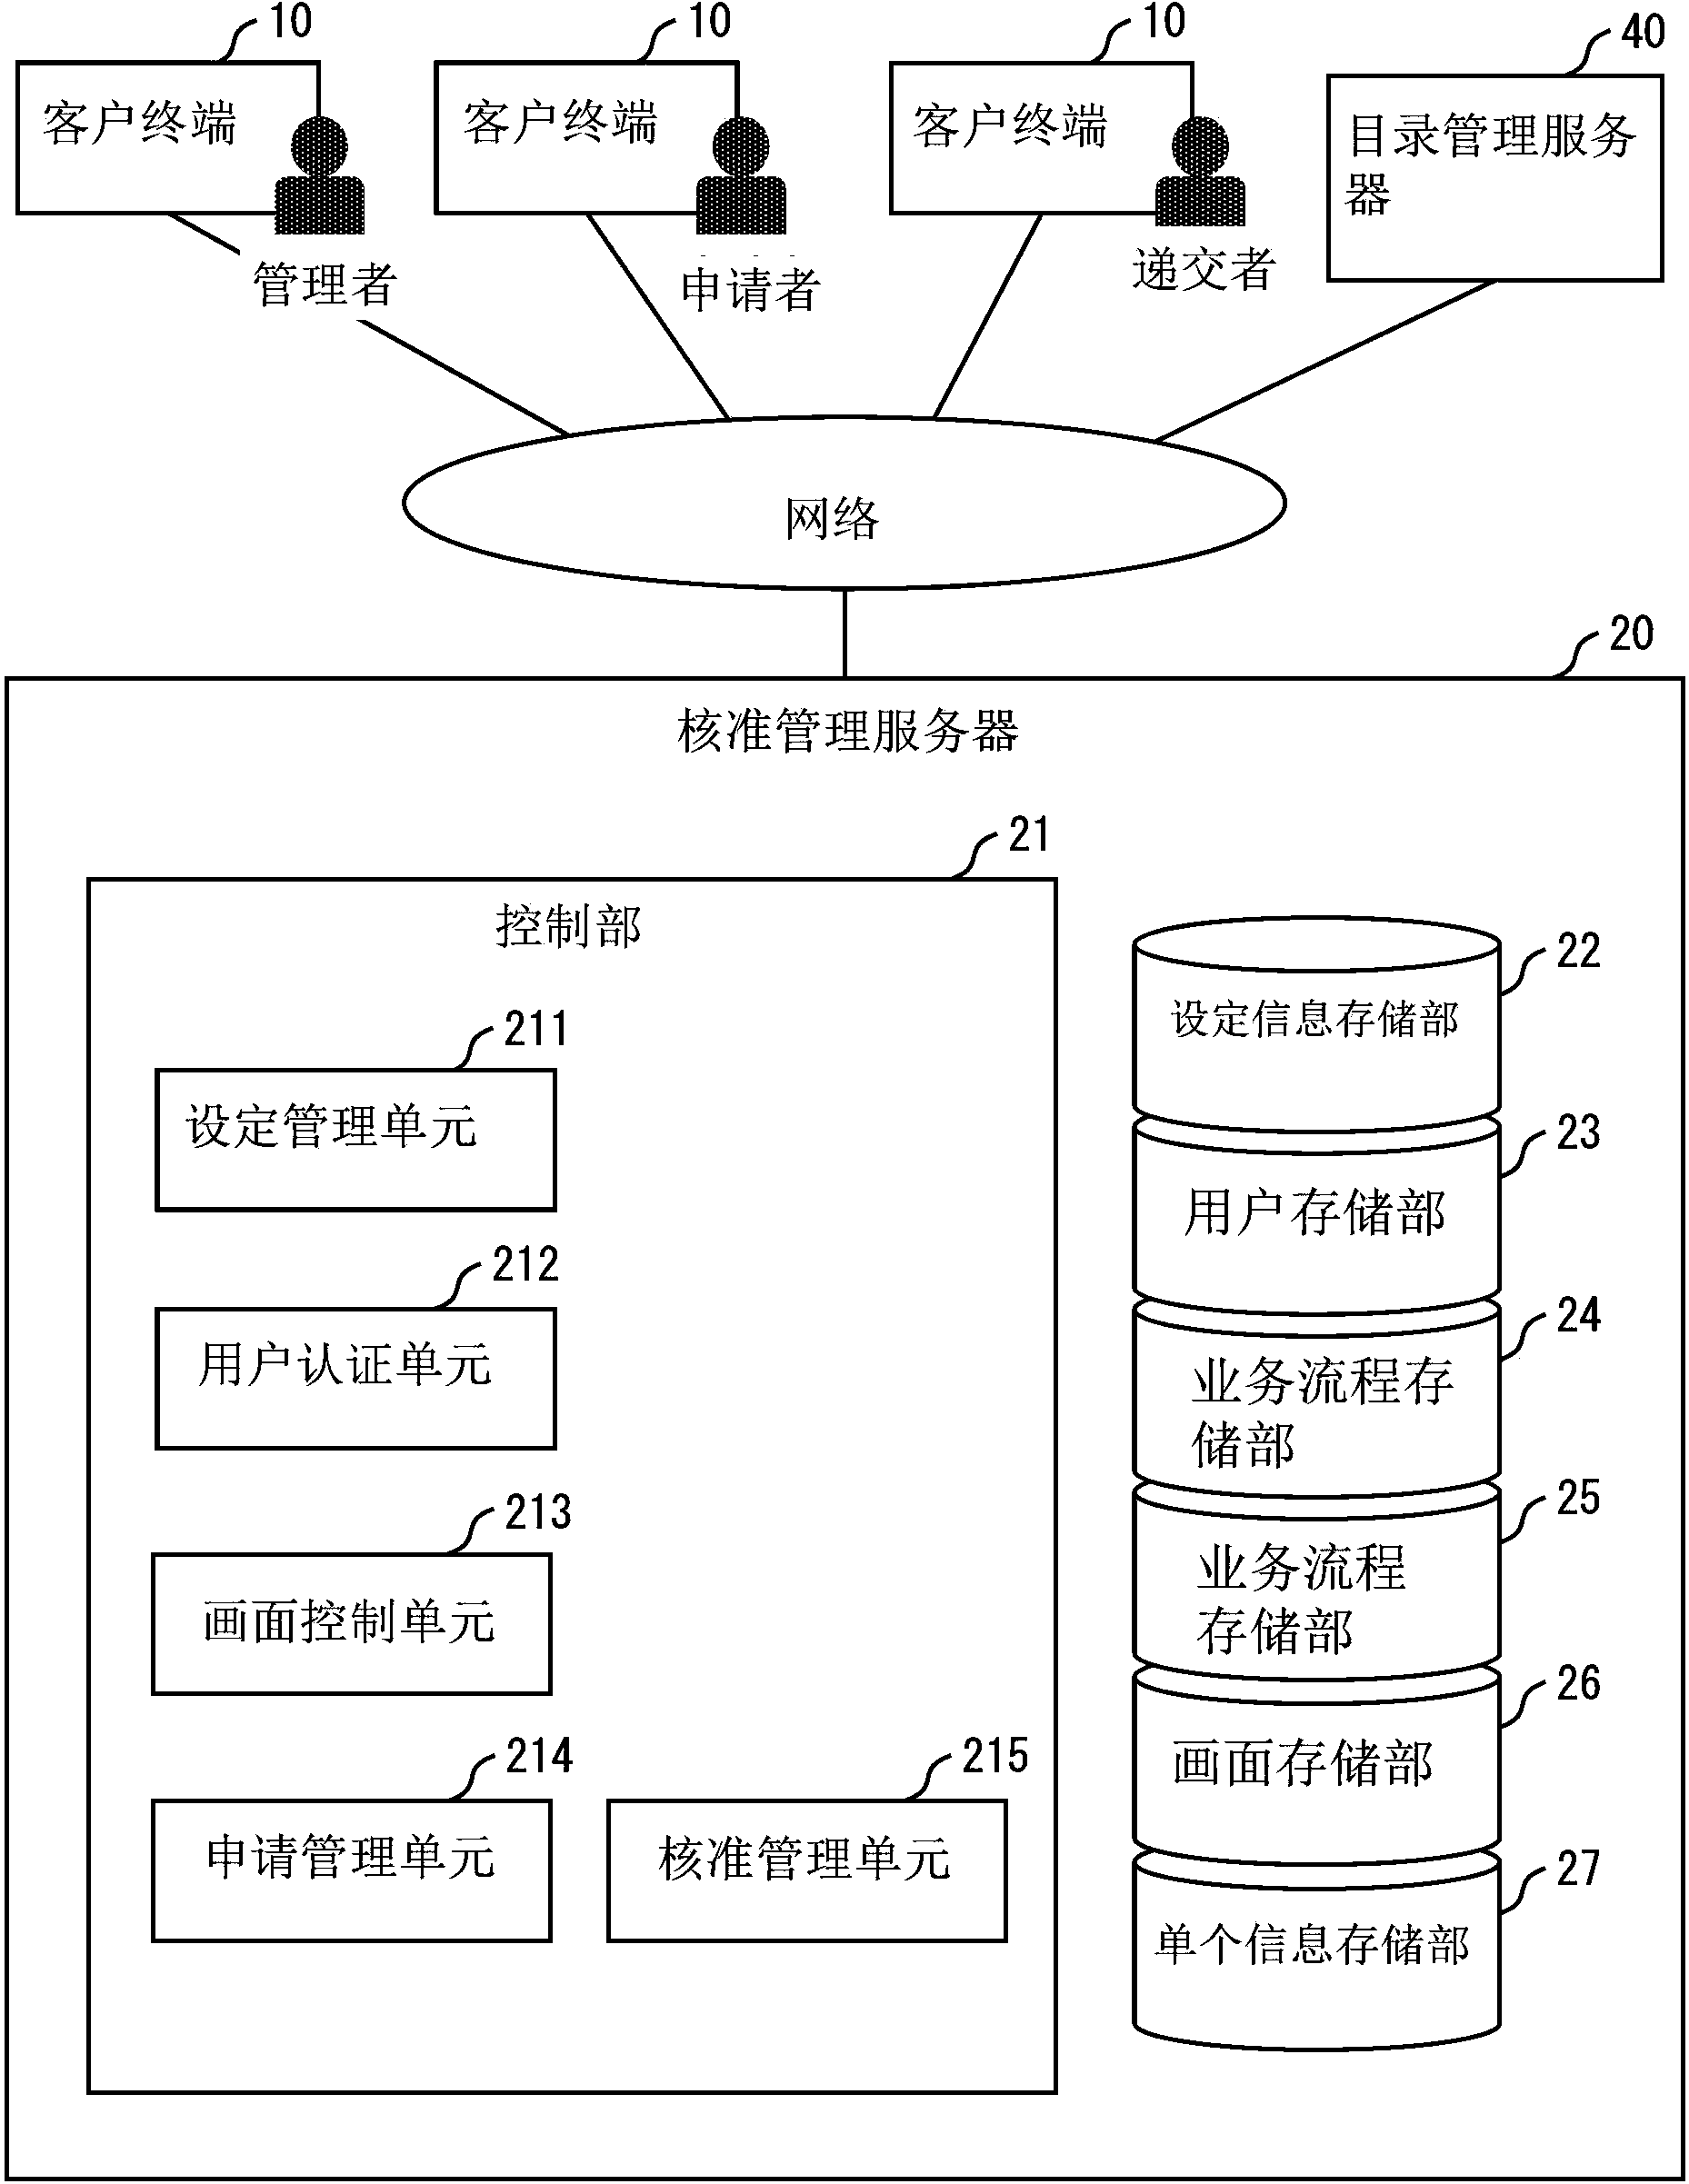 Approval control system and recognition management method